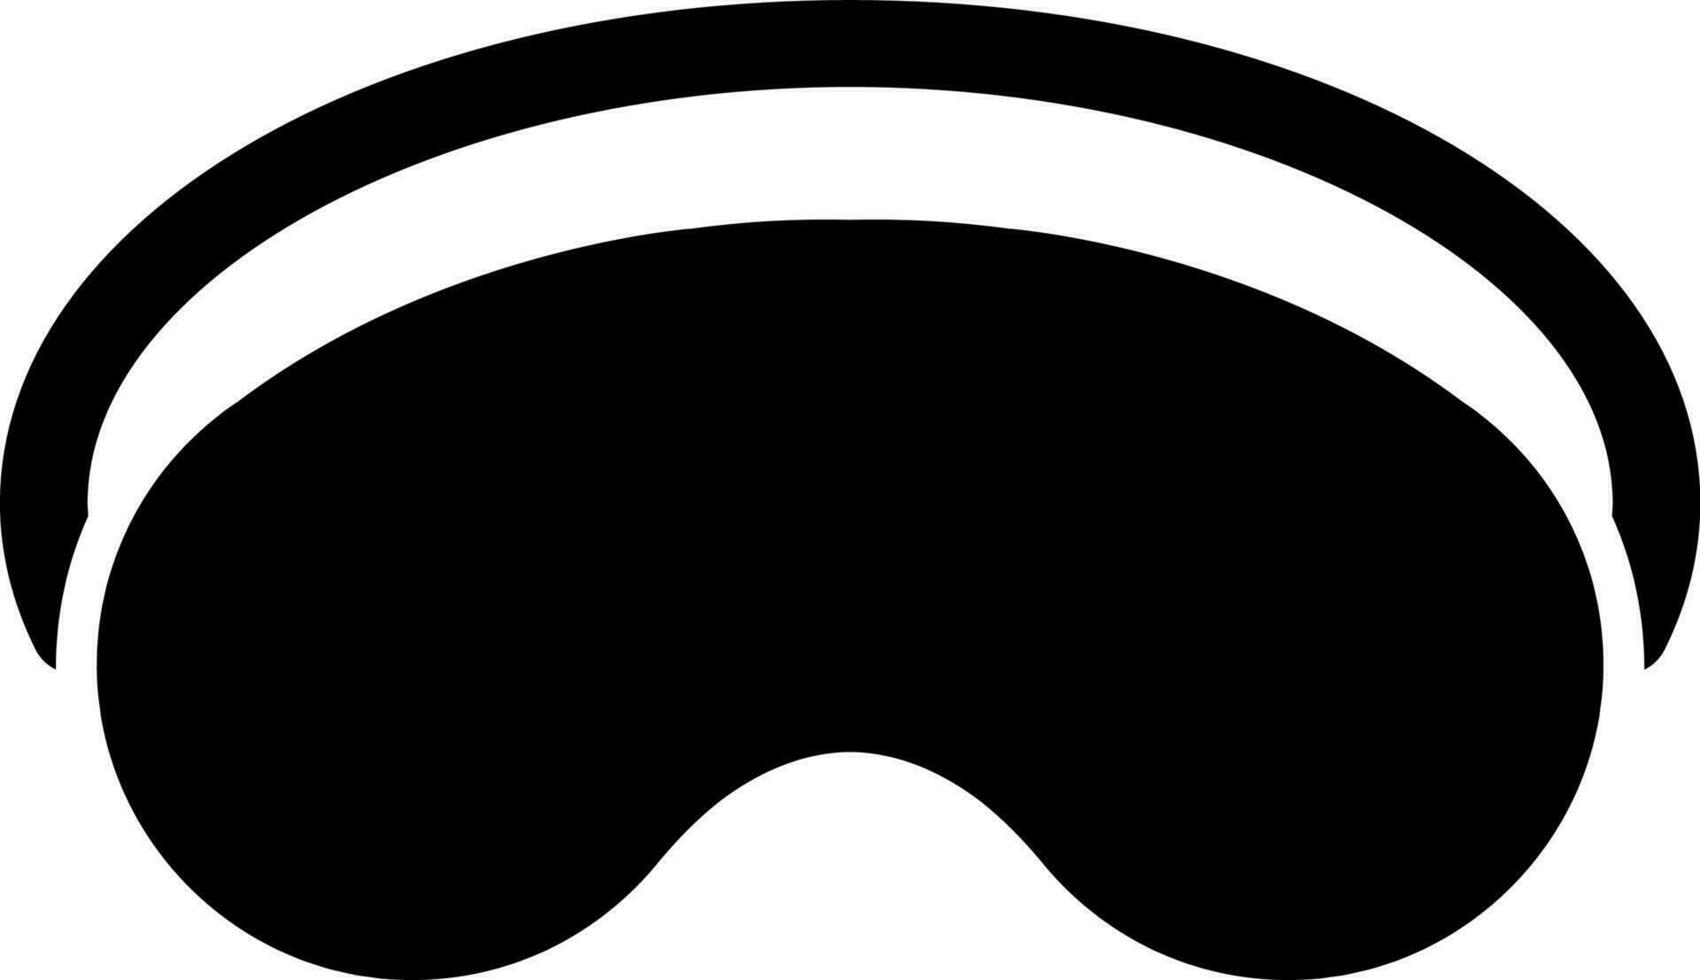 Sleeping eye mask icon in Black and White color. vector